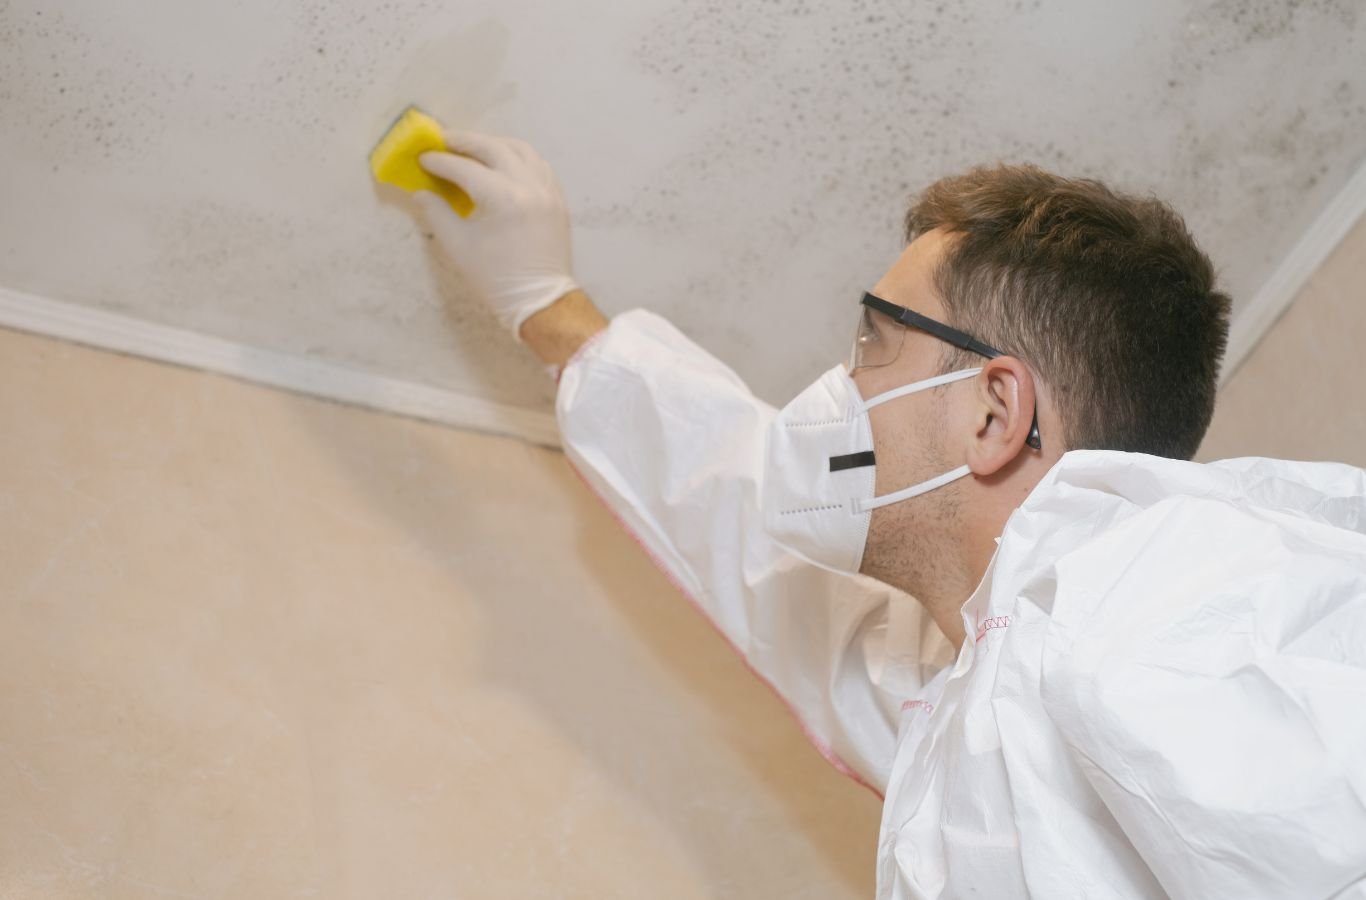 An Endymion Environmental technician conducting a thorough mold inspection at a home in Pacific Palisades, showcasing the expertise and precision in detecting mold issues.